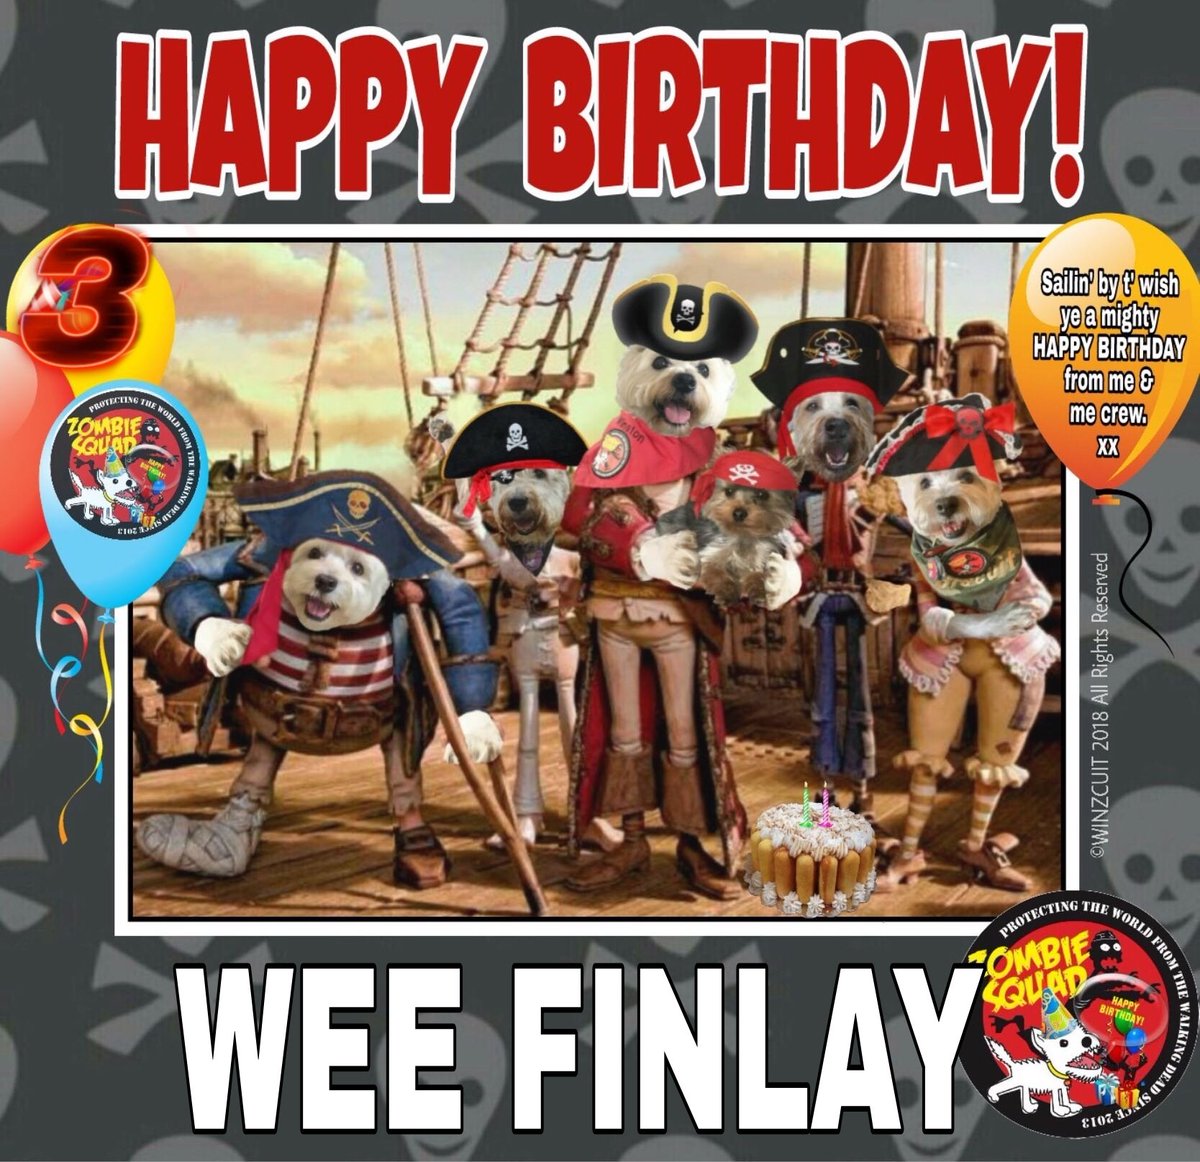 🎂Wishing a very 🎁HAPPY SWEET 3rd BIRTHDAY🎉 to our pawsome pal, WEE FINLAY from Leada Lord Billy & your ZombieSquad pals. We hope your special day is full of tasty treats, hugs & cayke, soldyer. RaaAAA!! 💜🎂🎁🎈🎁🎉 @finlaybinlay @ZSBirthday #ZSHQ